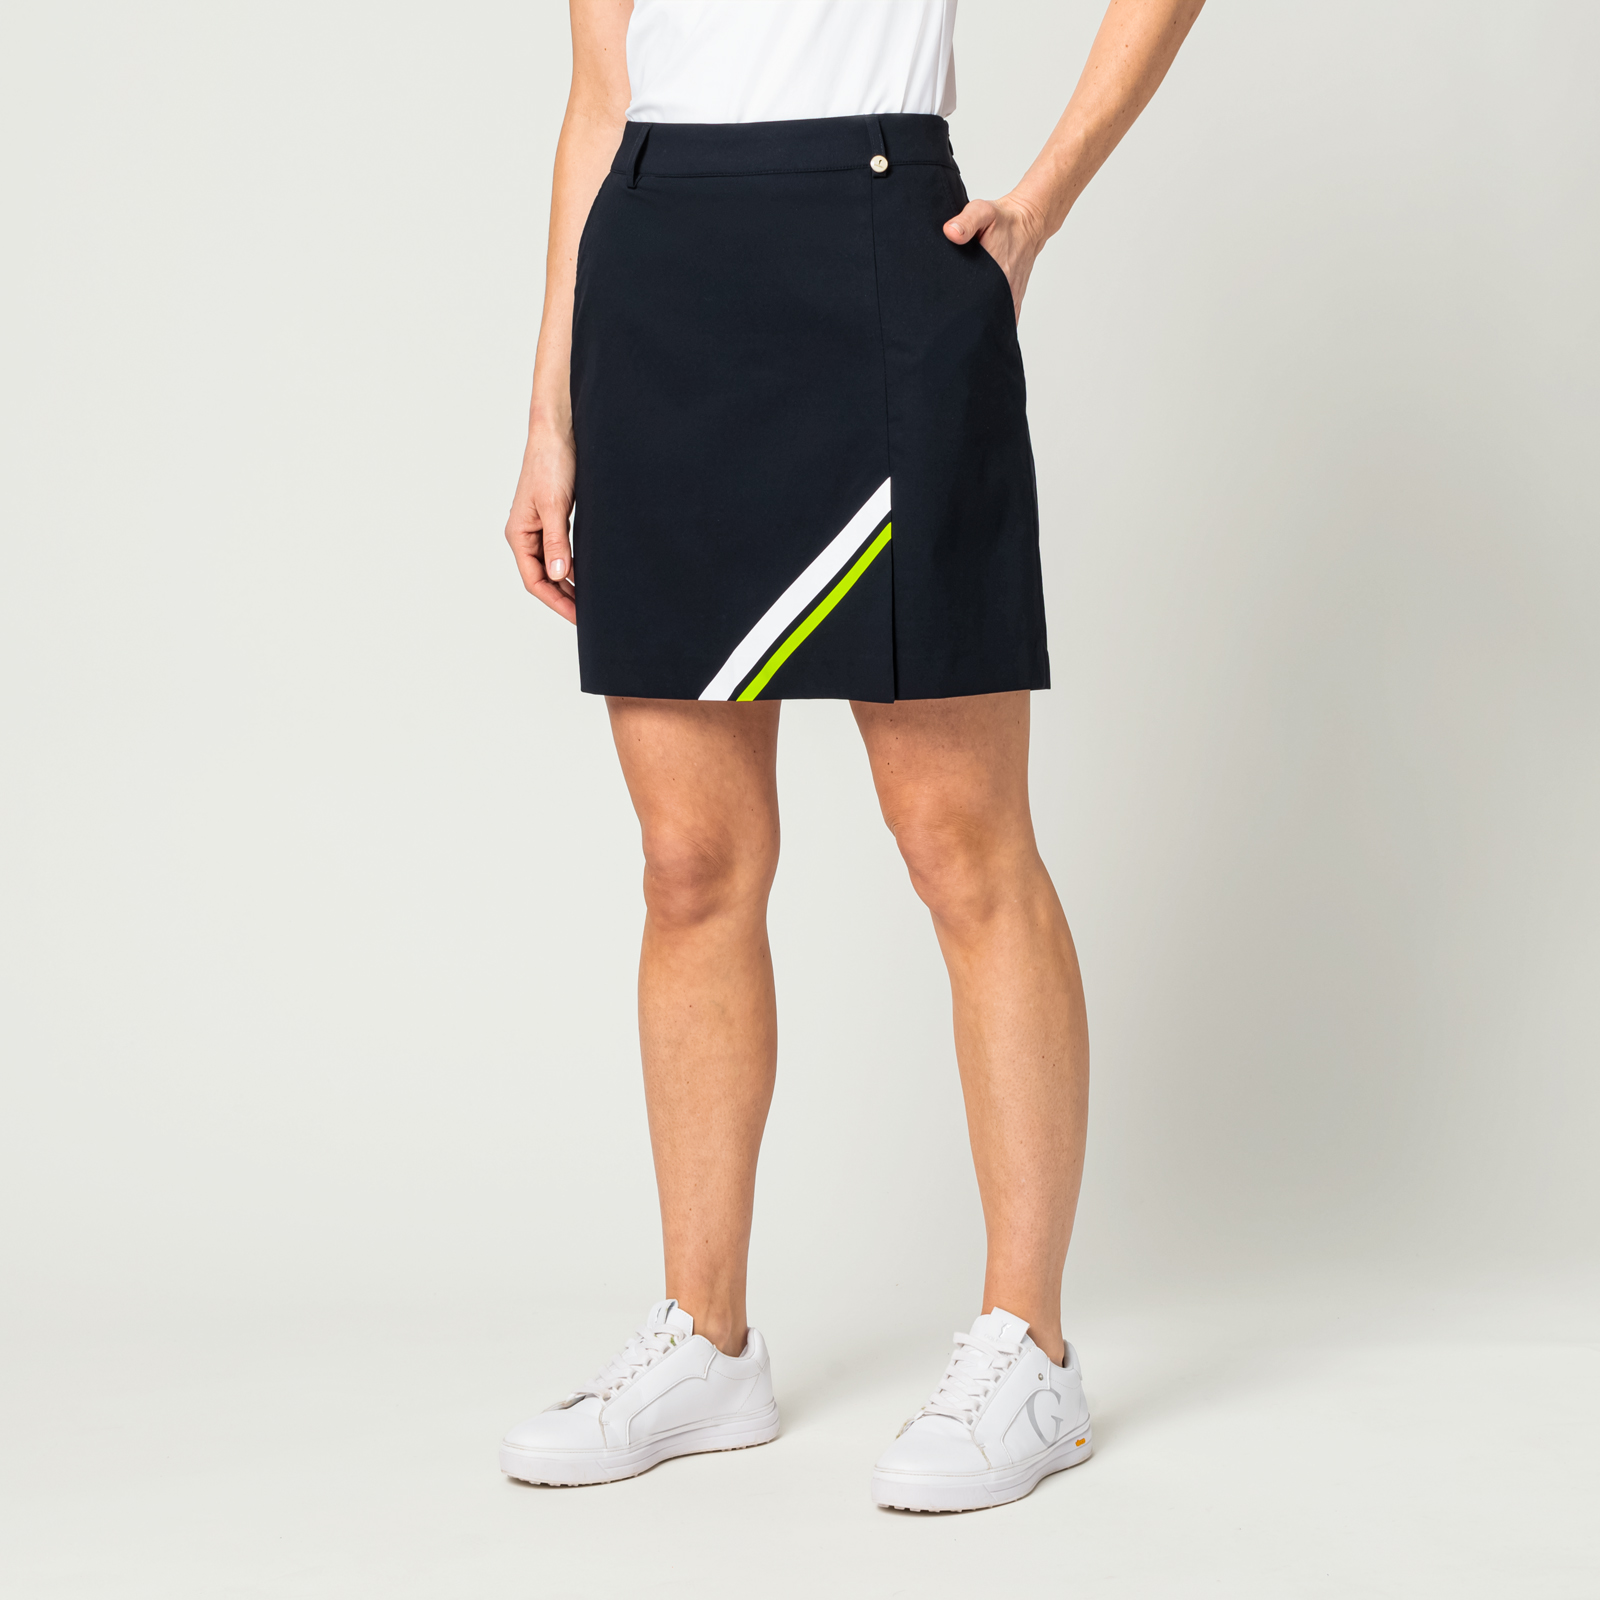 Ladies' stretch golf skort with sun protection 